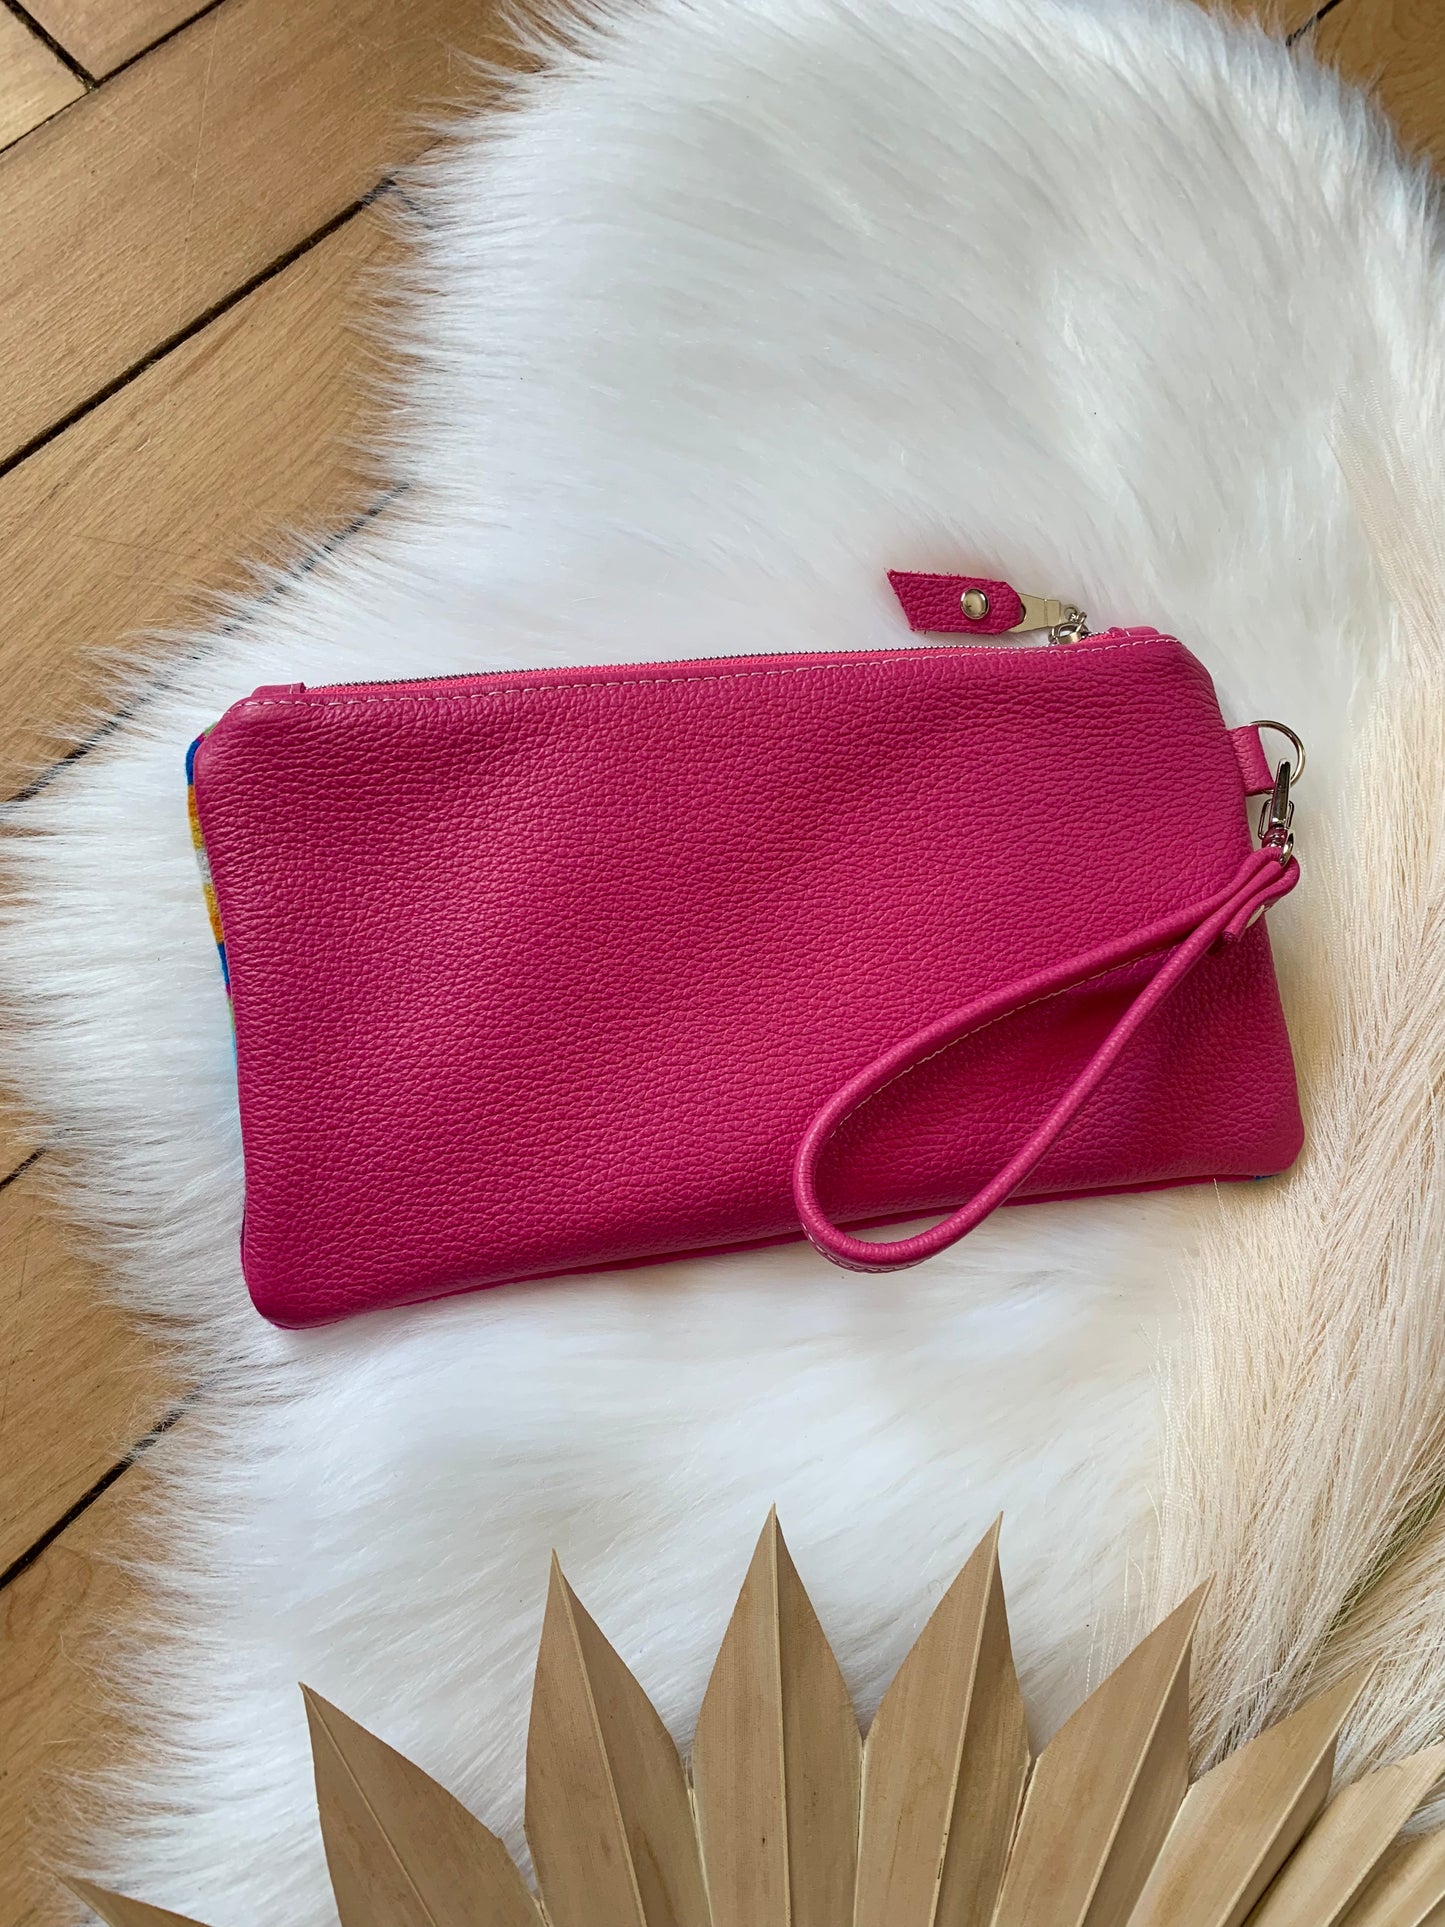 Wool and leather clutch wristlet, San Gabriel wool, hot pink leather clutch wallet